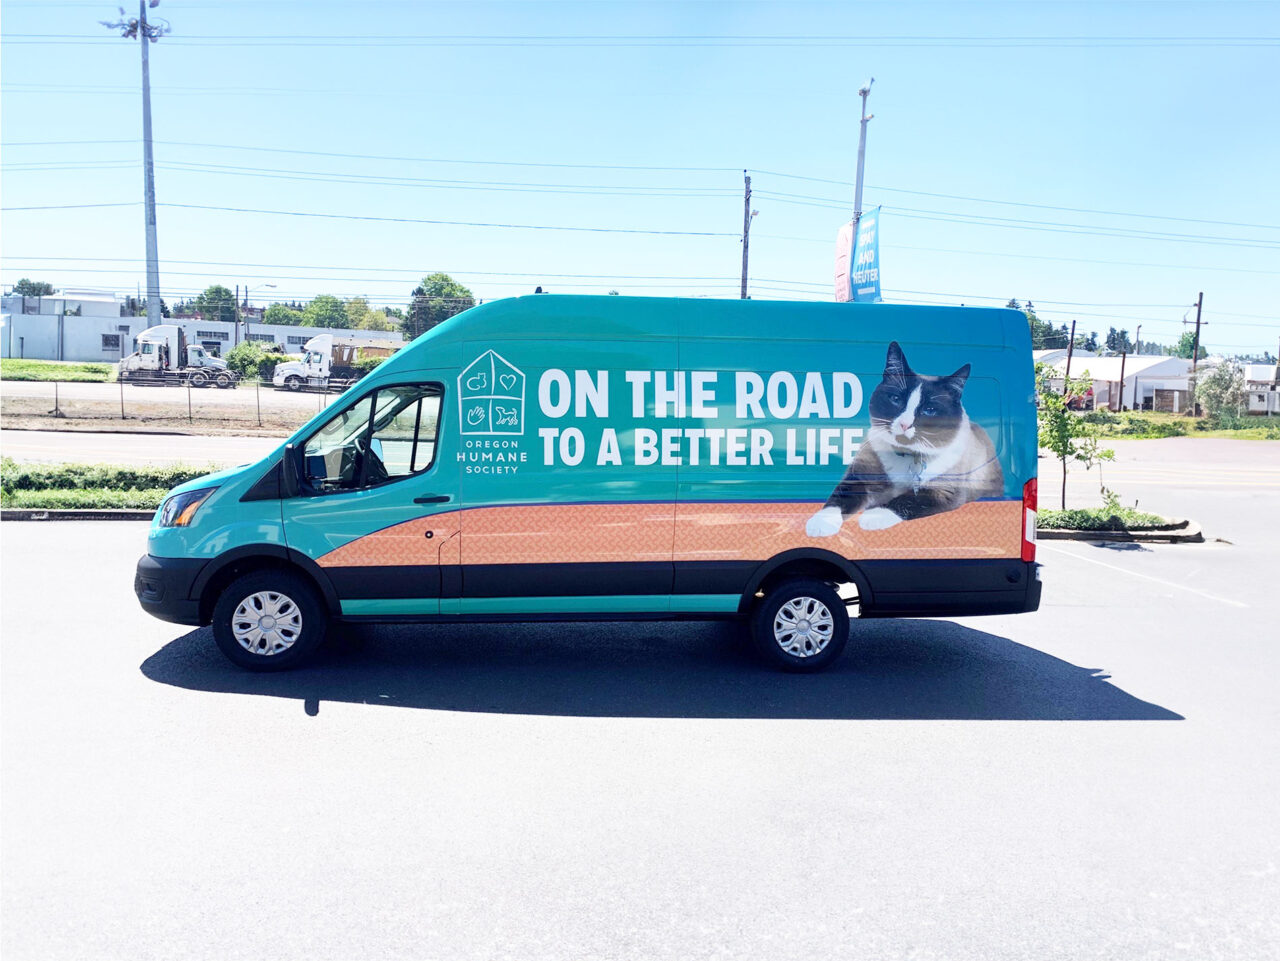 Example of Morel's wide format capabilities, showing a van's branded vehicle wrap for their client, Brave Care.